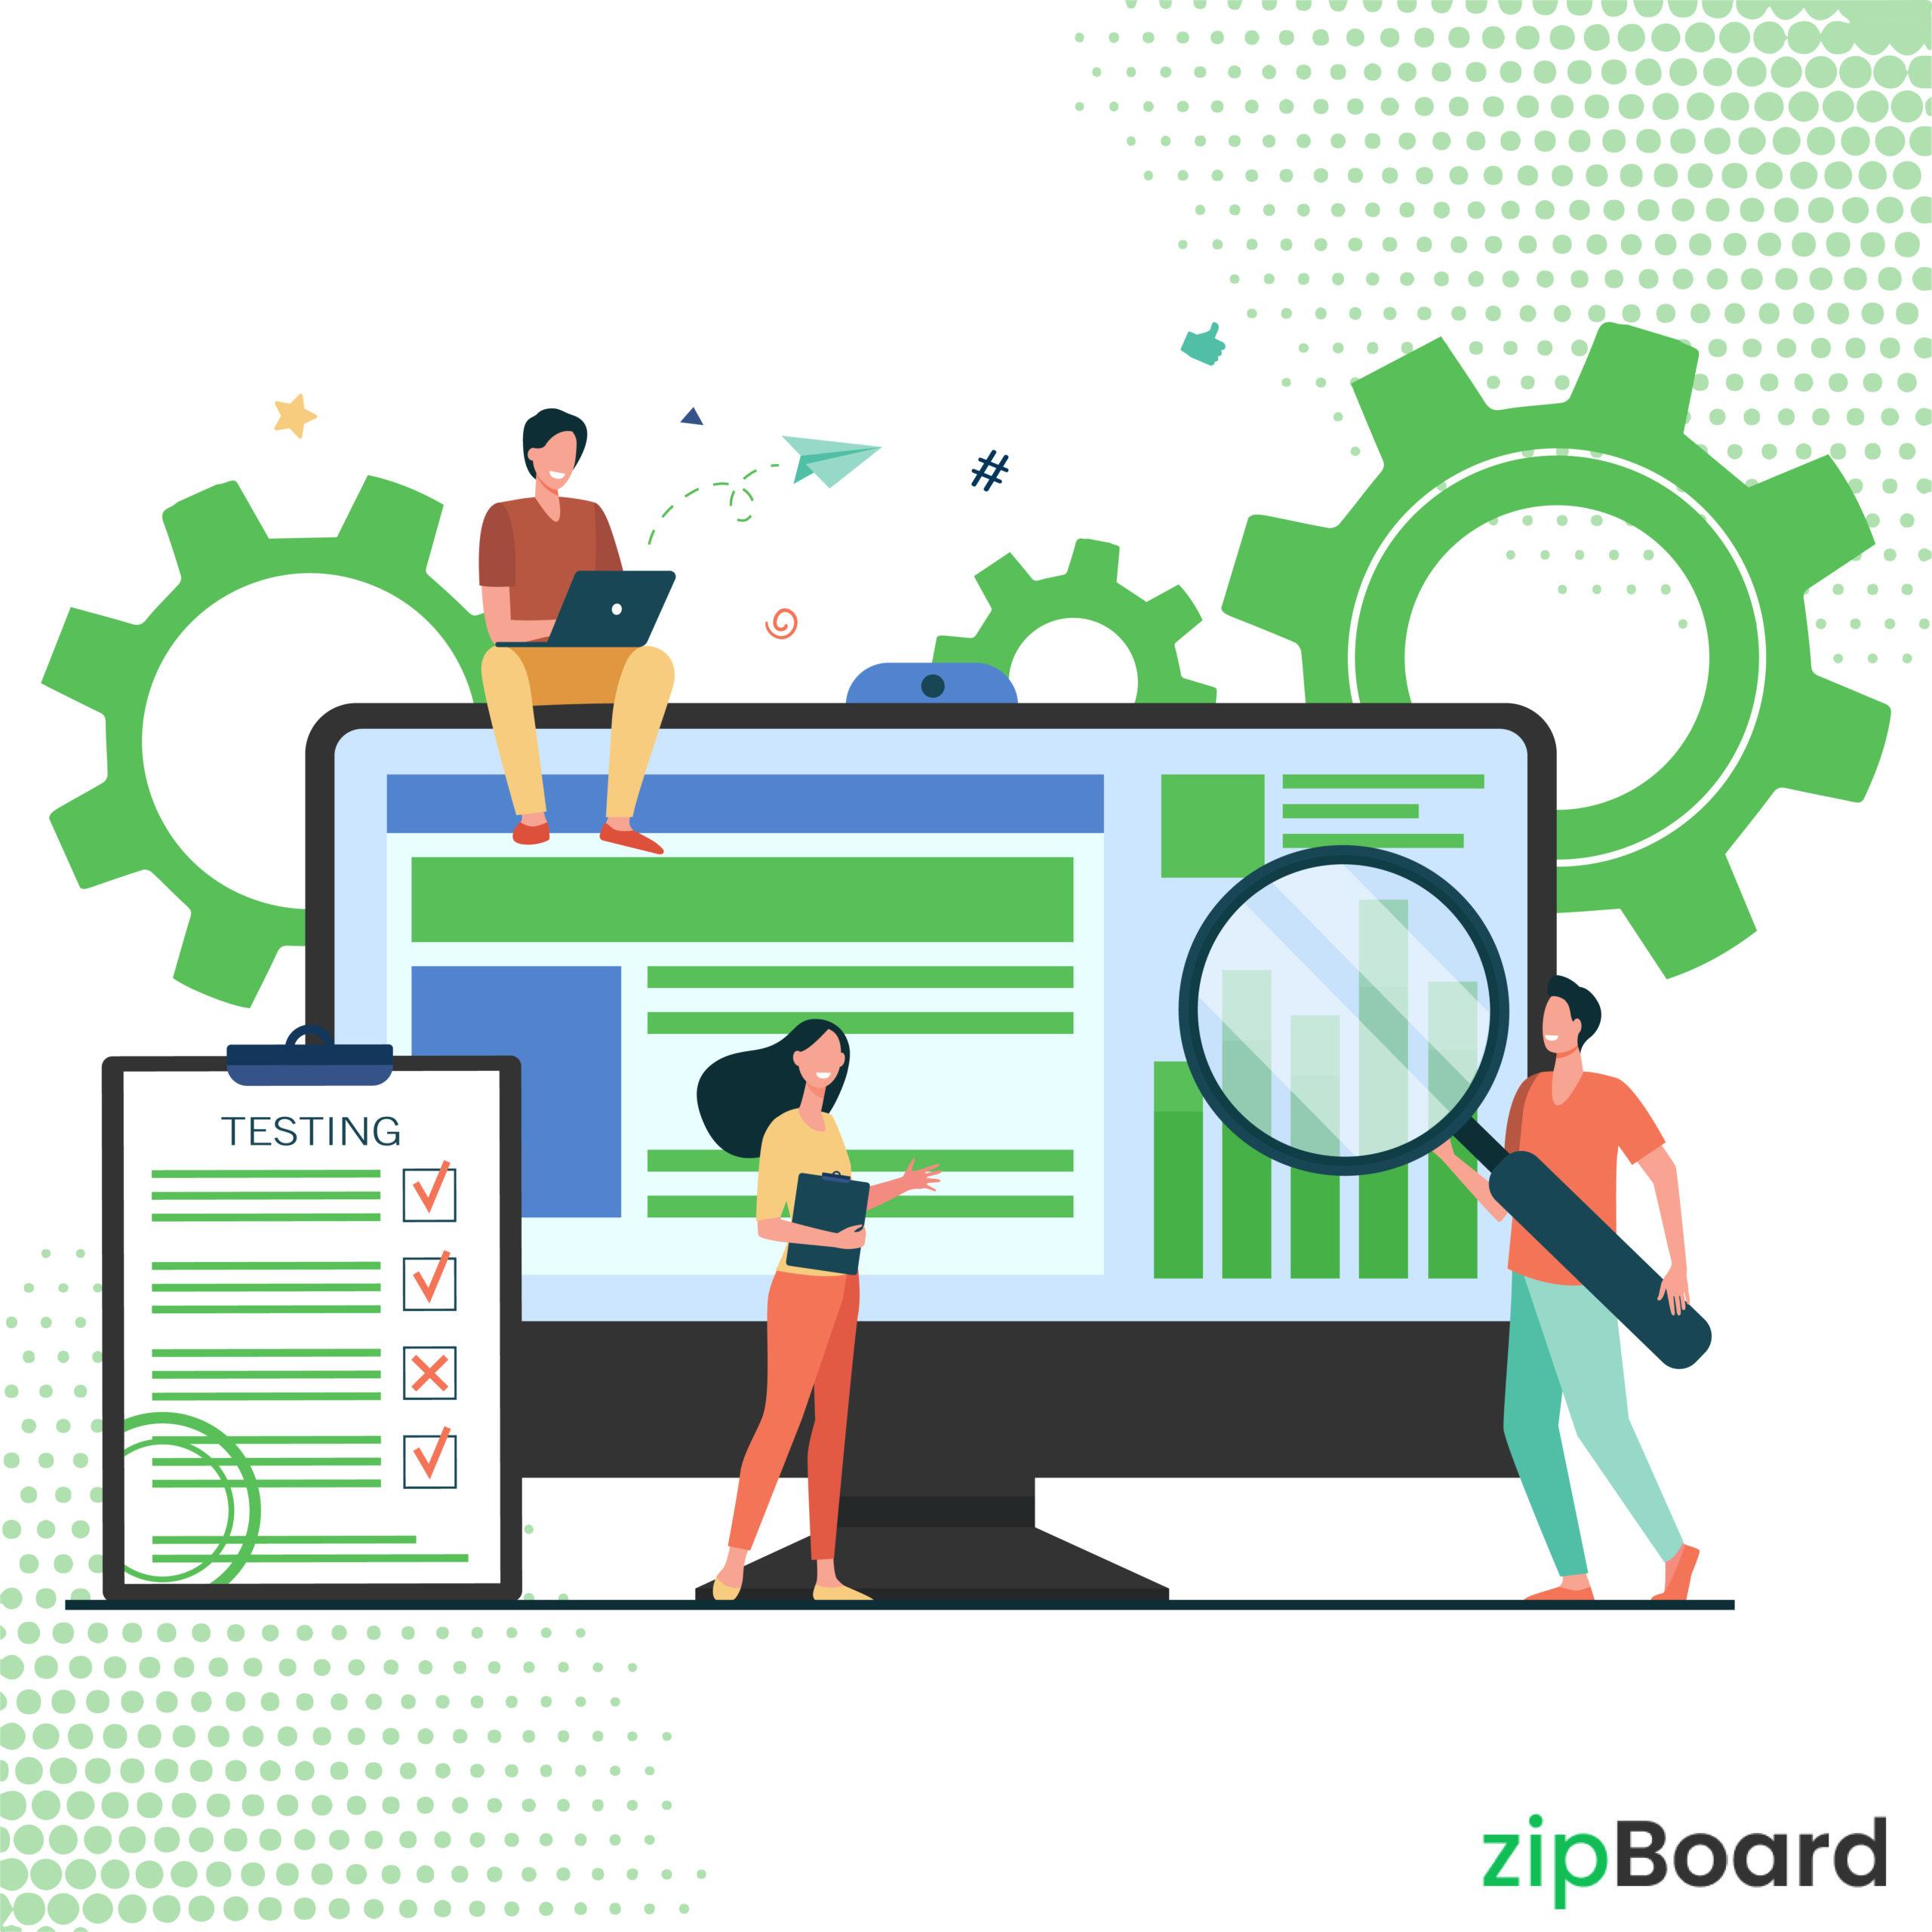 Product: Software Development with zipBoard - Faster & Better